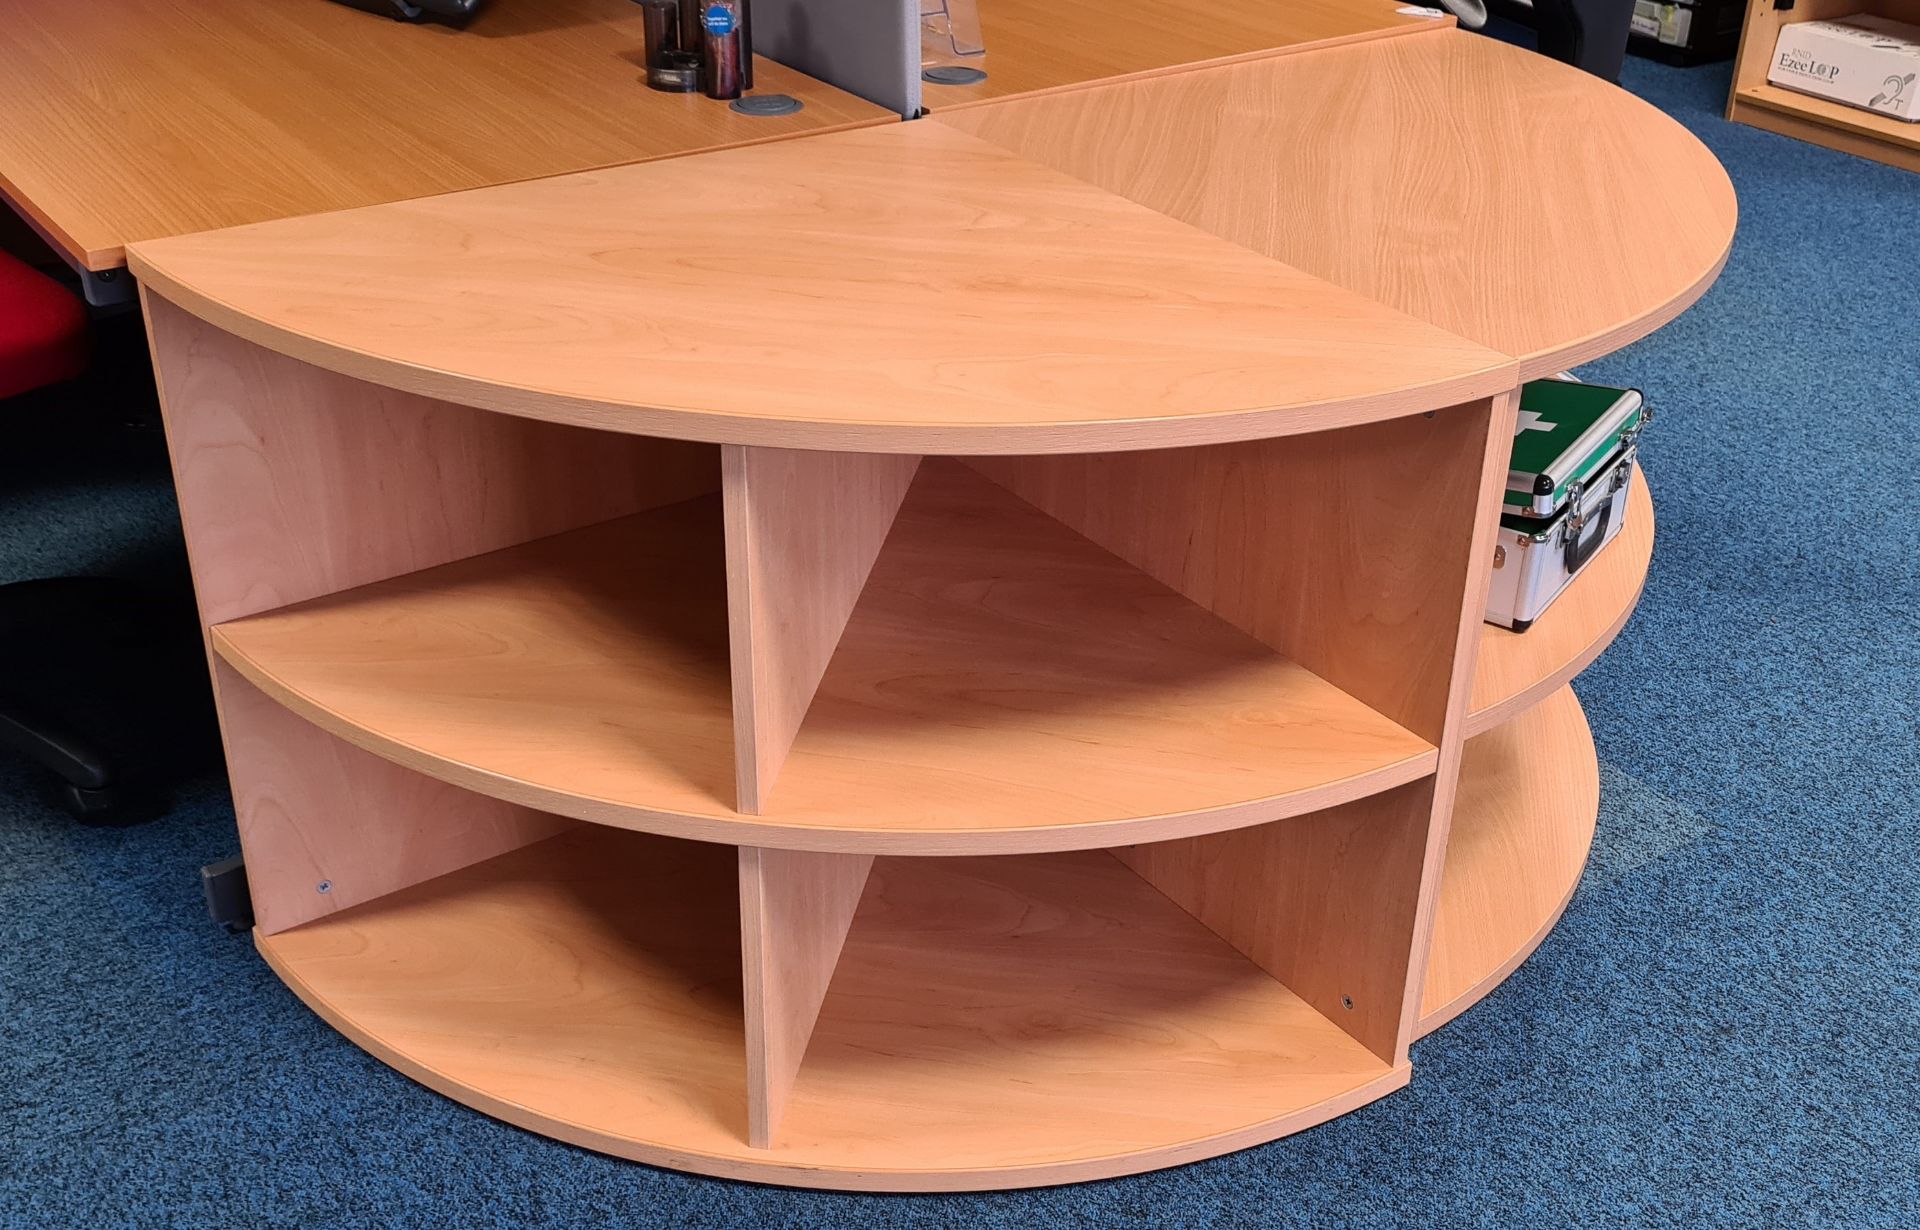 4 x Office Corner Bookcases With a Beech Finish - Ref: 4 x PK001 - Location: Site 2, Stafford,